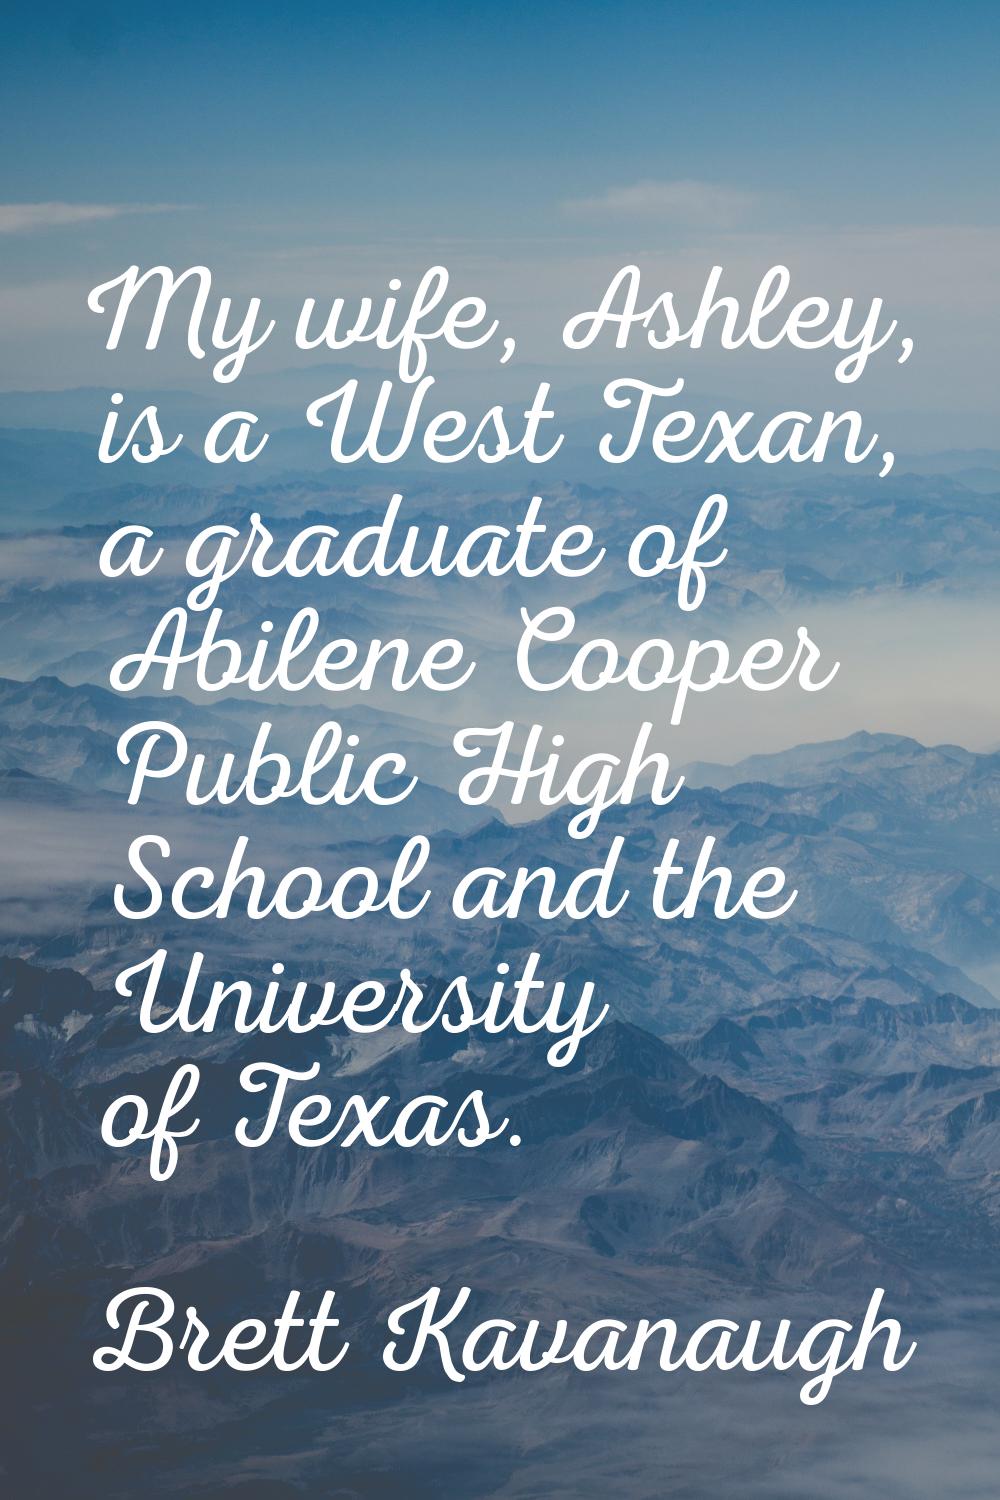 My wife, Ashley, is a West Texan, a graduate of Abilene Cooper Public High School and the Universit